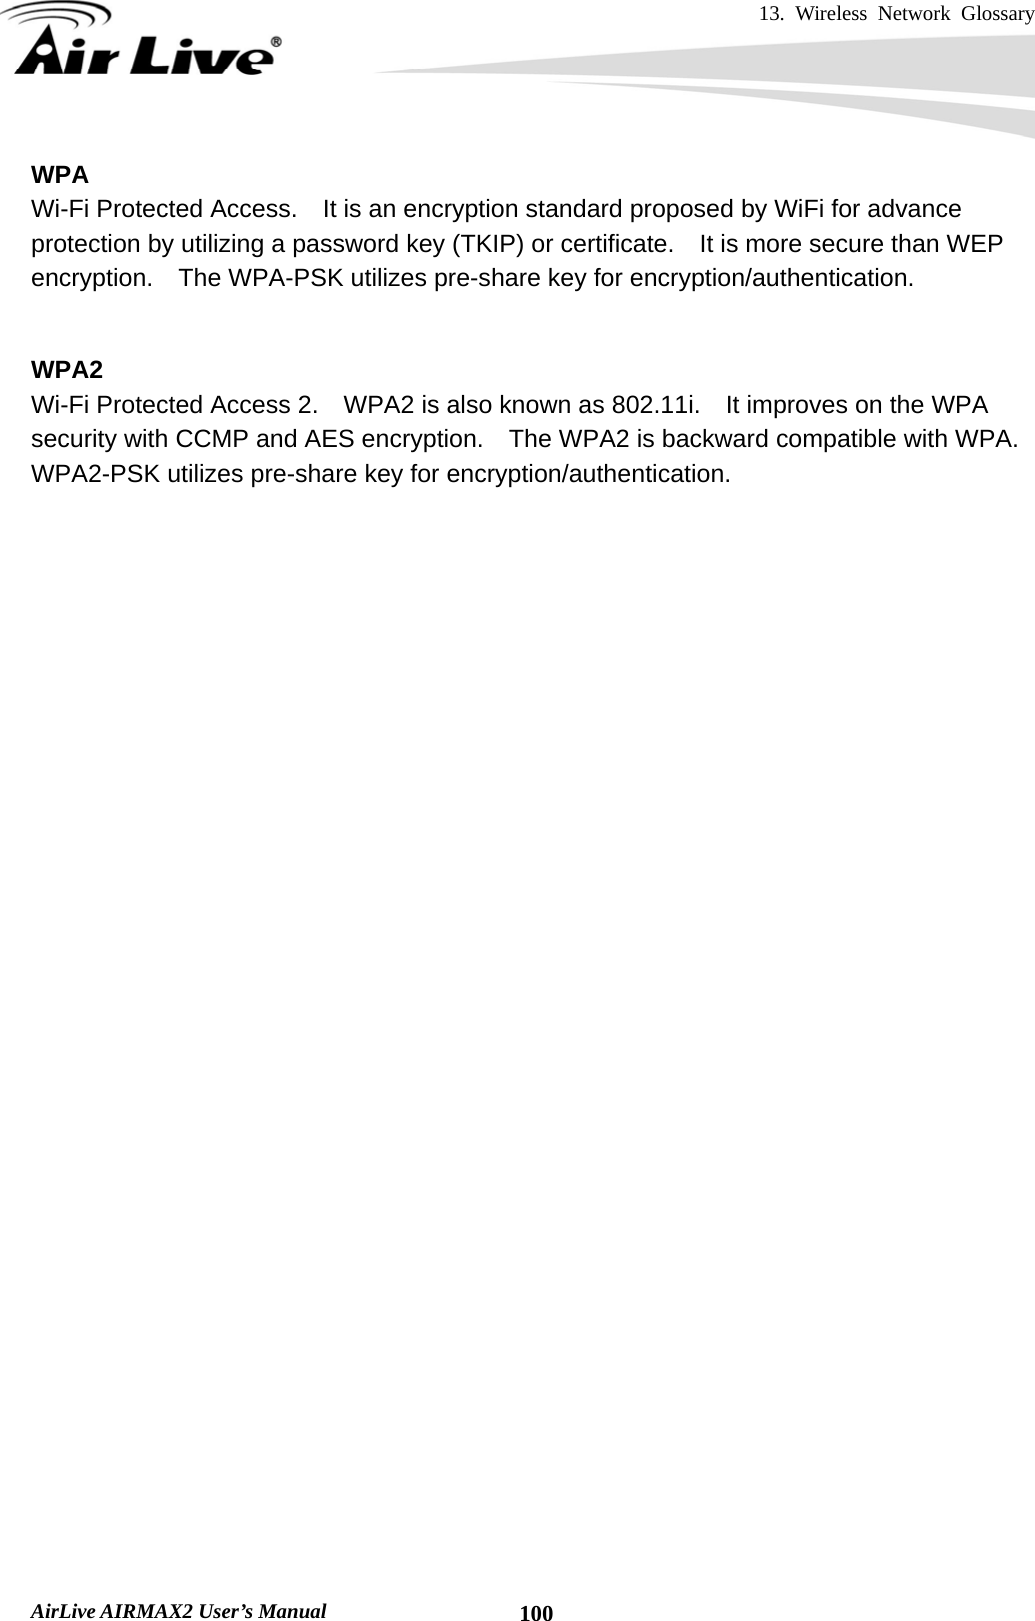 13. Wireless Network Glossary       AirLive AIRMAX2 User’s Manual  100WPA Wi-Fi Protected Access.    It is an encryption standard proposed by WiFi for advance protection by utilizing a password key (TKIP) or certificate.  It is more secure than WEP encryption.    The WPA-PSK utilizes pre-share key for encryption/authentication.     WPA2 Wi-Fi Protected Access 2.    WPA2 is also known as 802.11i.    It improves on the WPA security with CCMP and AES encryption.    The WPA2 is backward compatible with WPA.   WPA2-PSK utilizes pre-share key for encryption/authentication.     